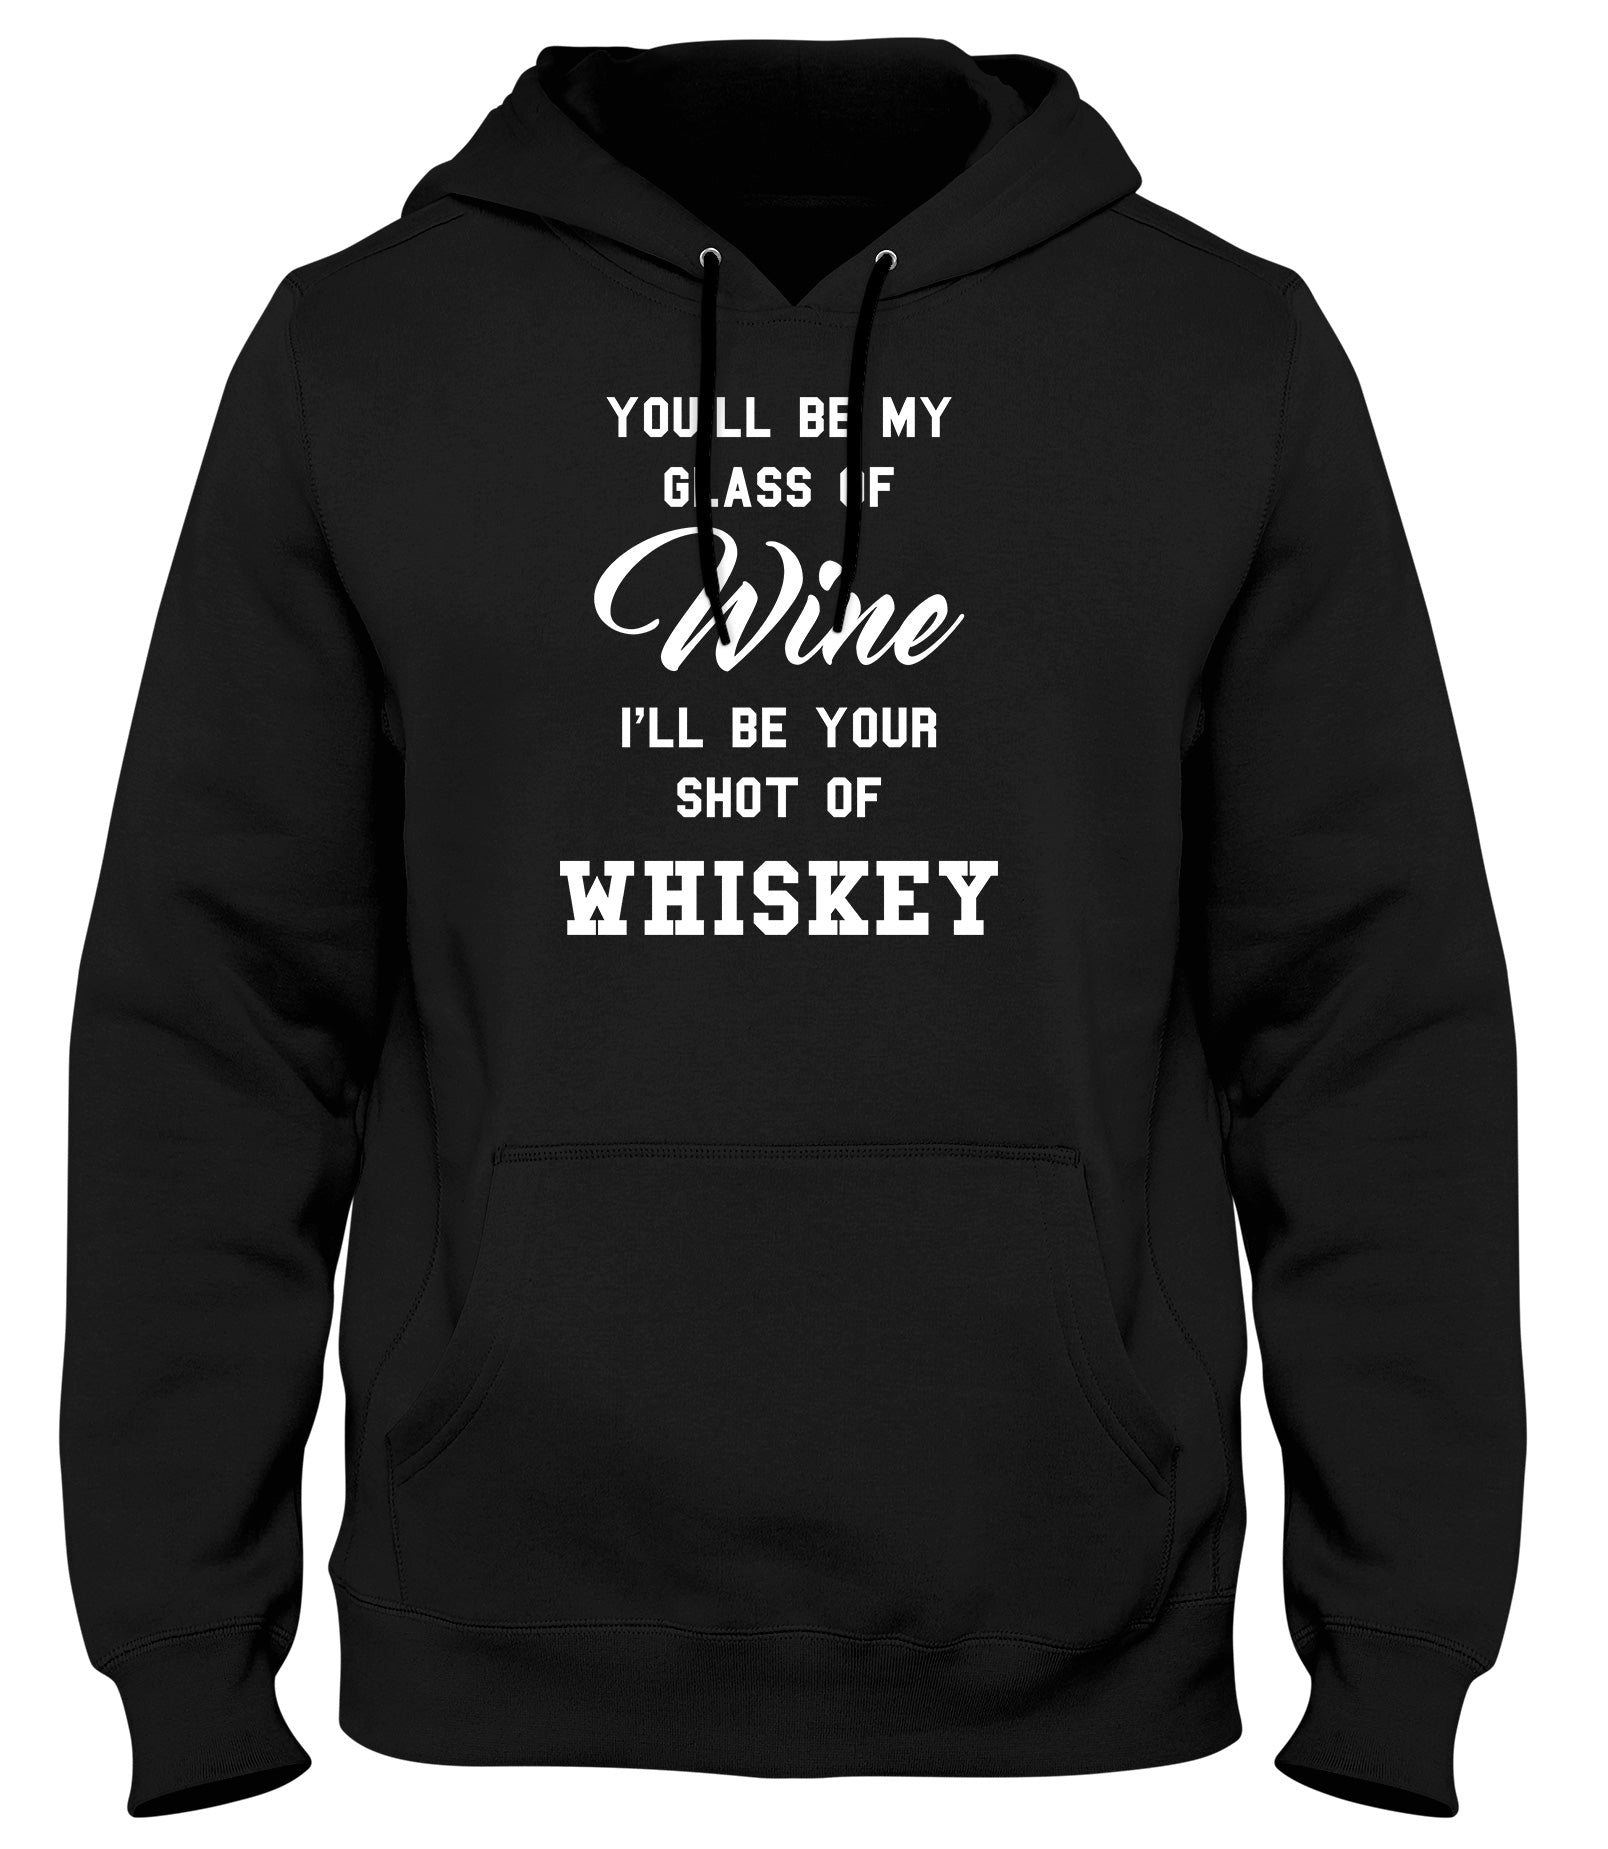 YOU'LL BE MY GLASS OF WINE  I'LL BE YOUR SHOT OF WHISKEY MENS LADIES WOMENS UNISEX HOODIE